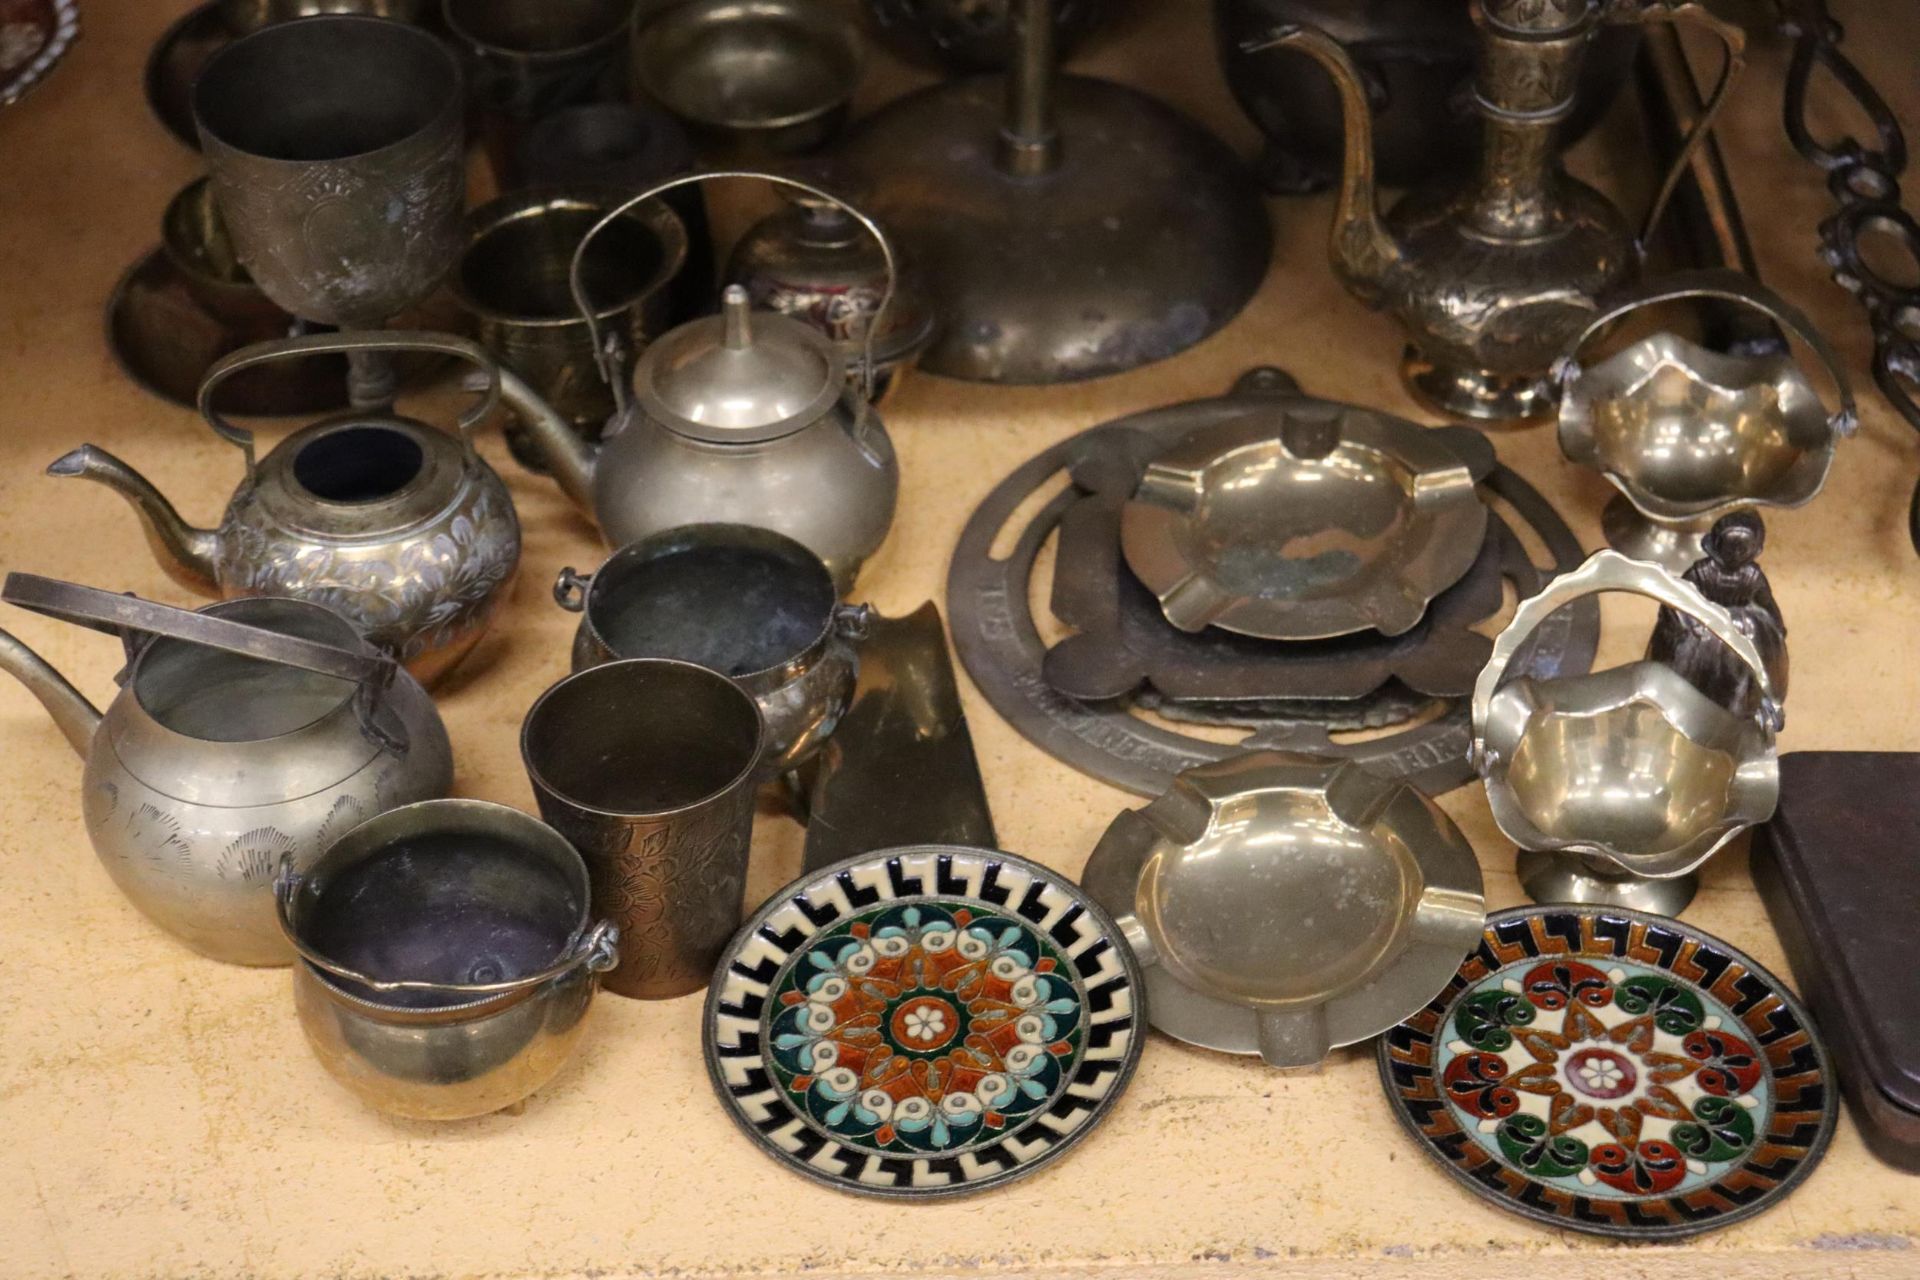 A LARGE QUANTITY OF BRASSWARE TO INCLUDE PLANTERS, SMALL KETTLES, BOWLS, VASES, ETC - Image 2 of 6